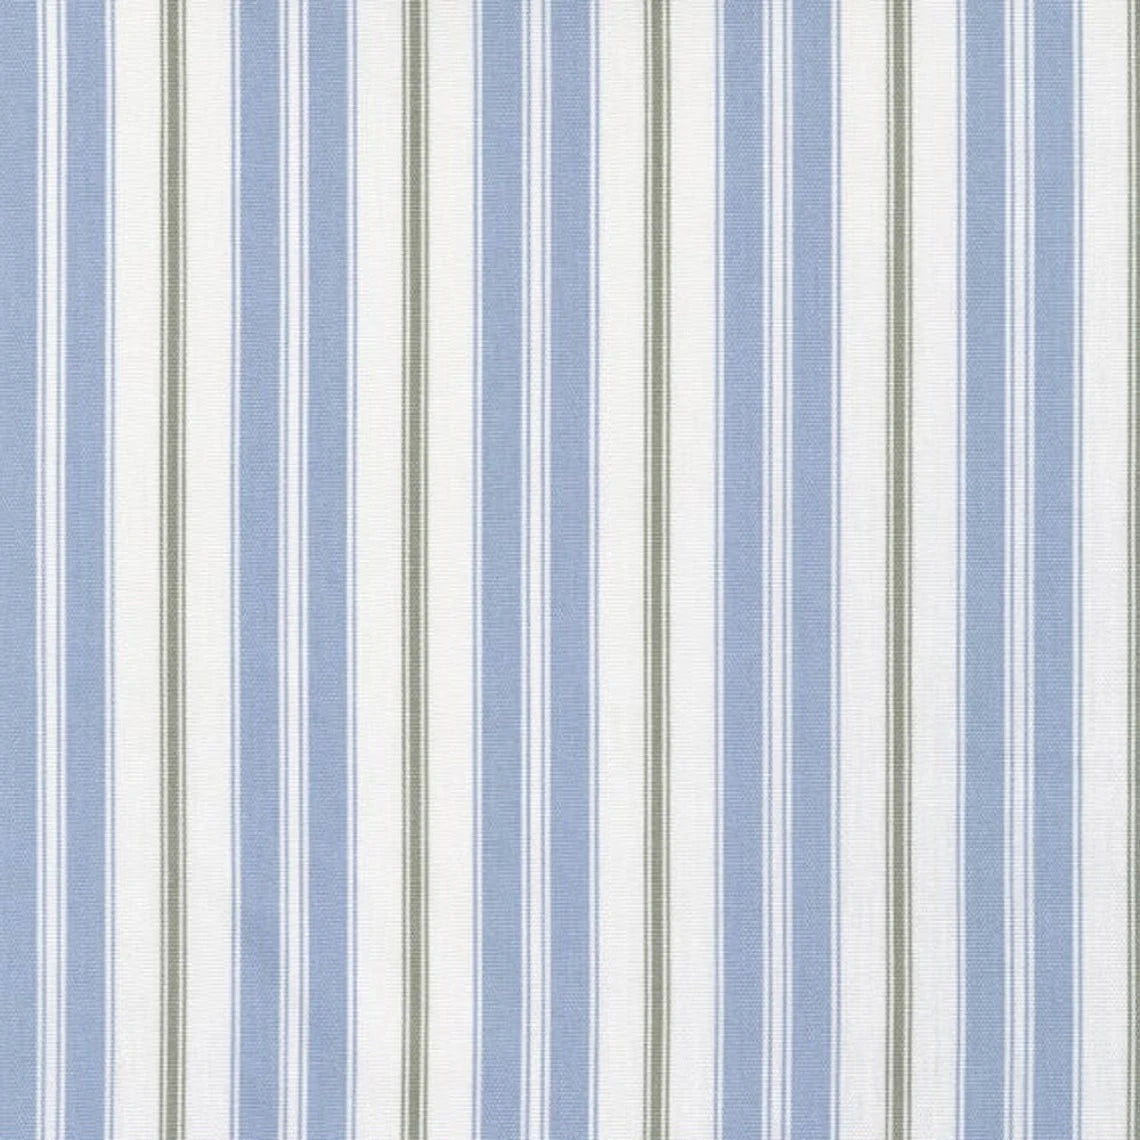 tailored tier cafe curtain panels pair in newbury antique blue stripe- blue, green, white